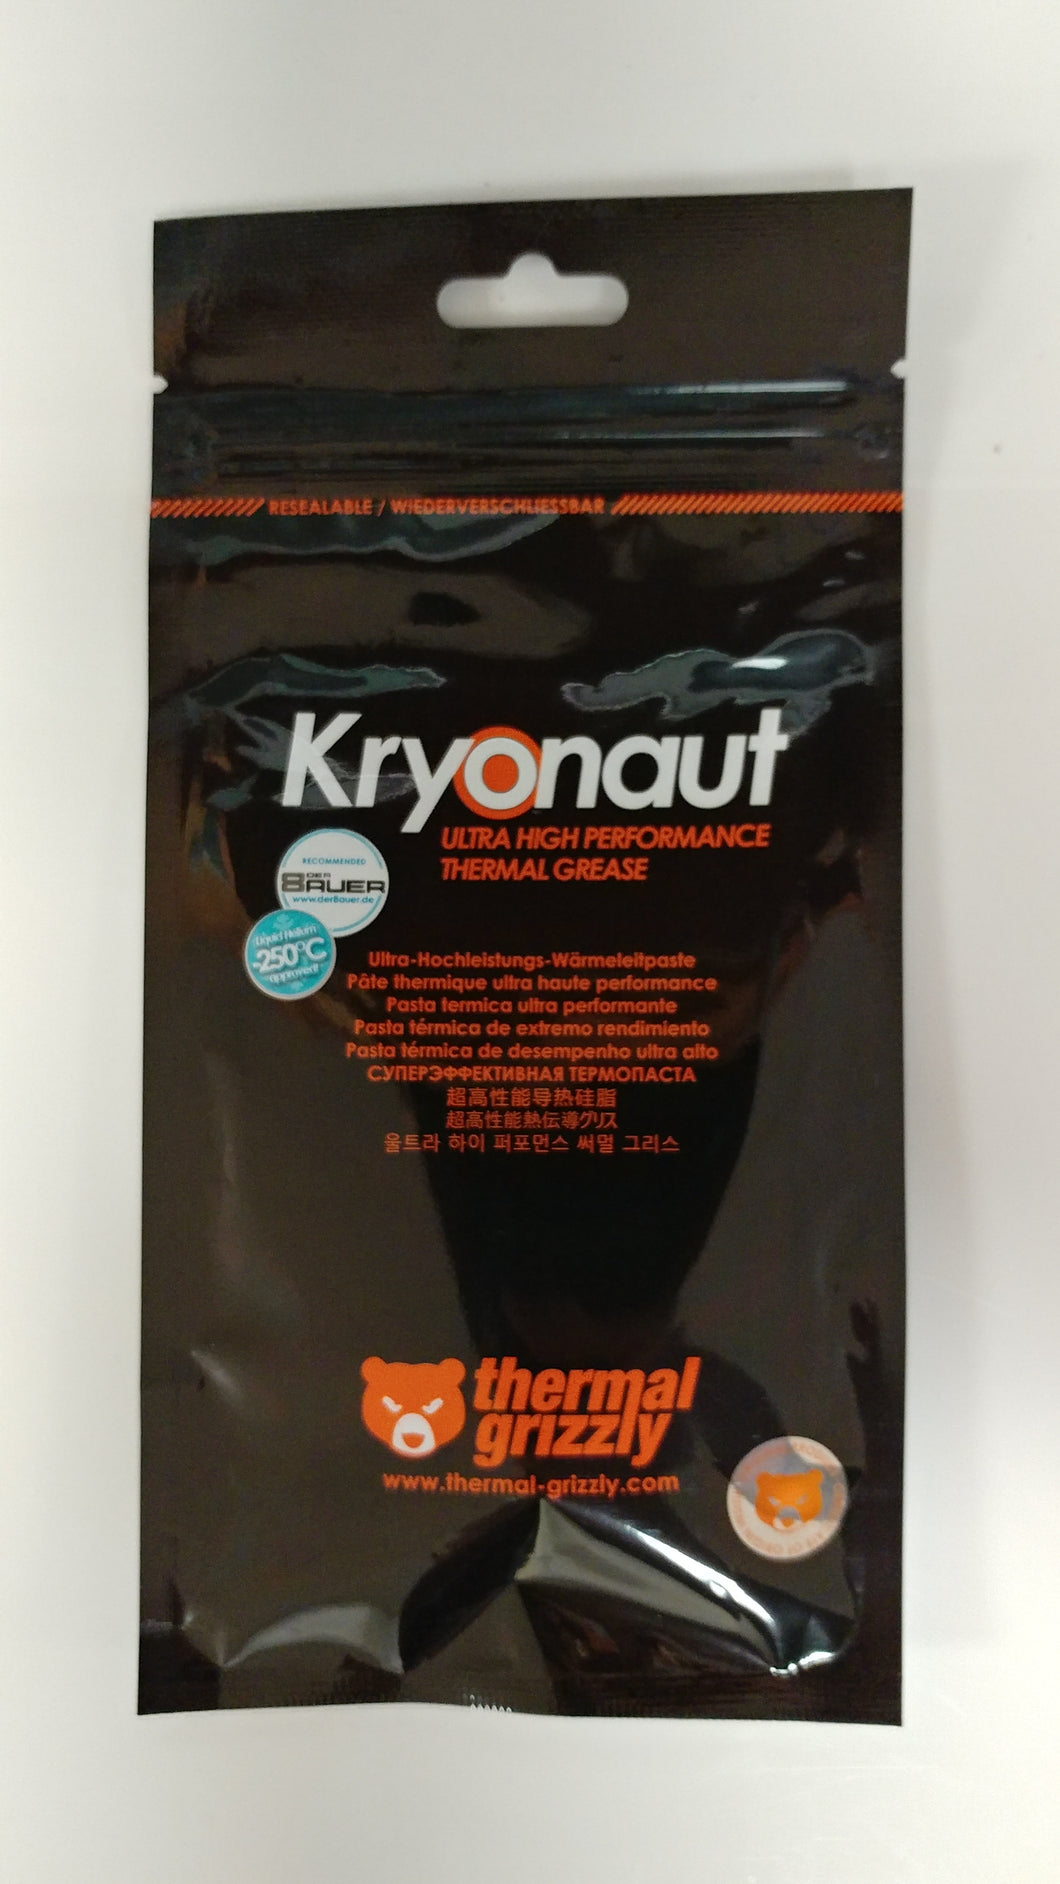 Thermal Grizzly, Kryonaut, Ultra High Performance Thermal Grease